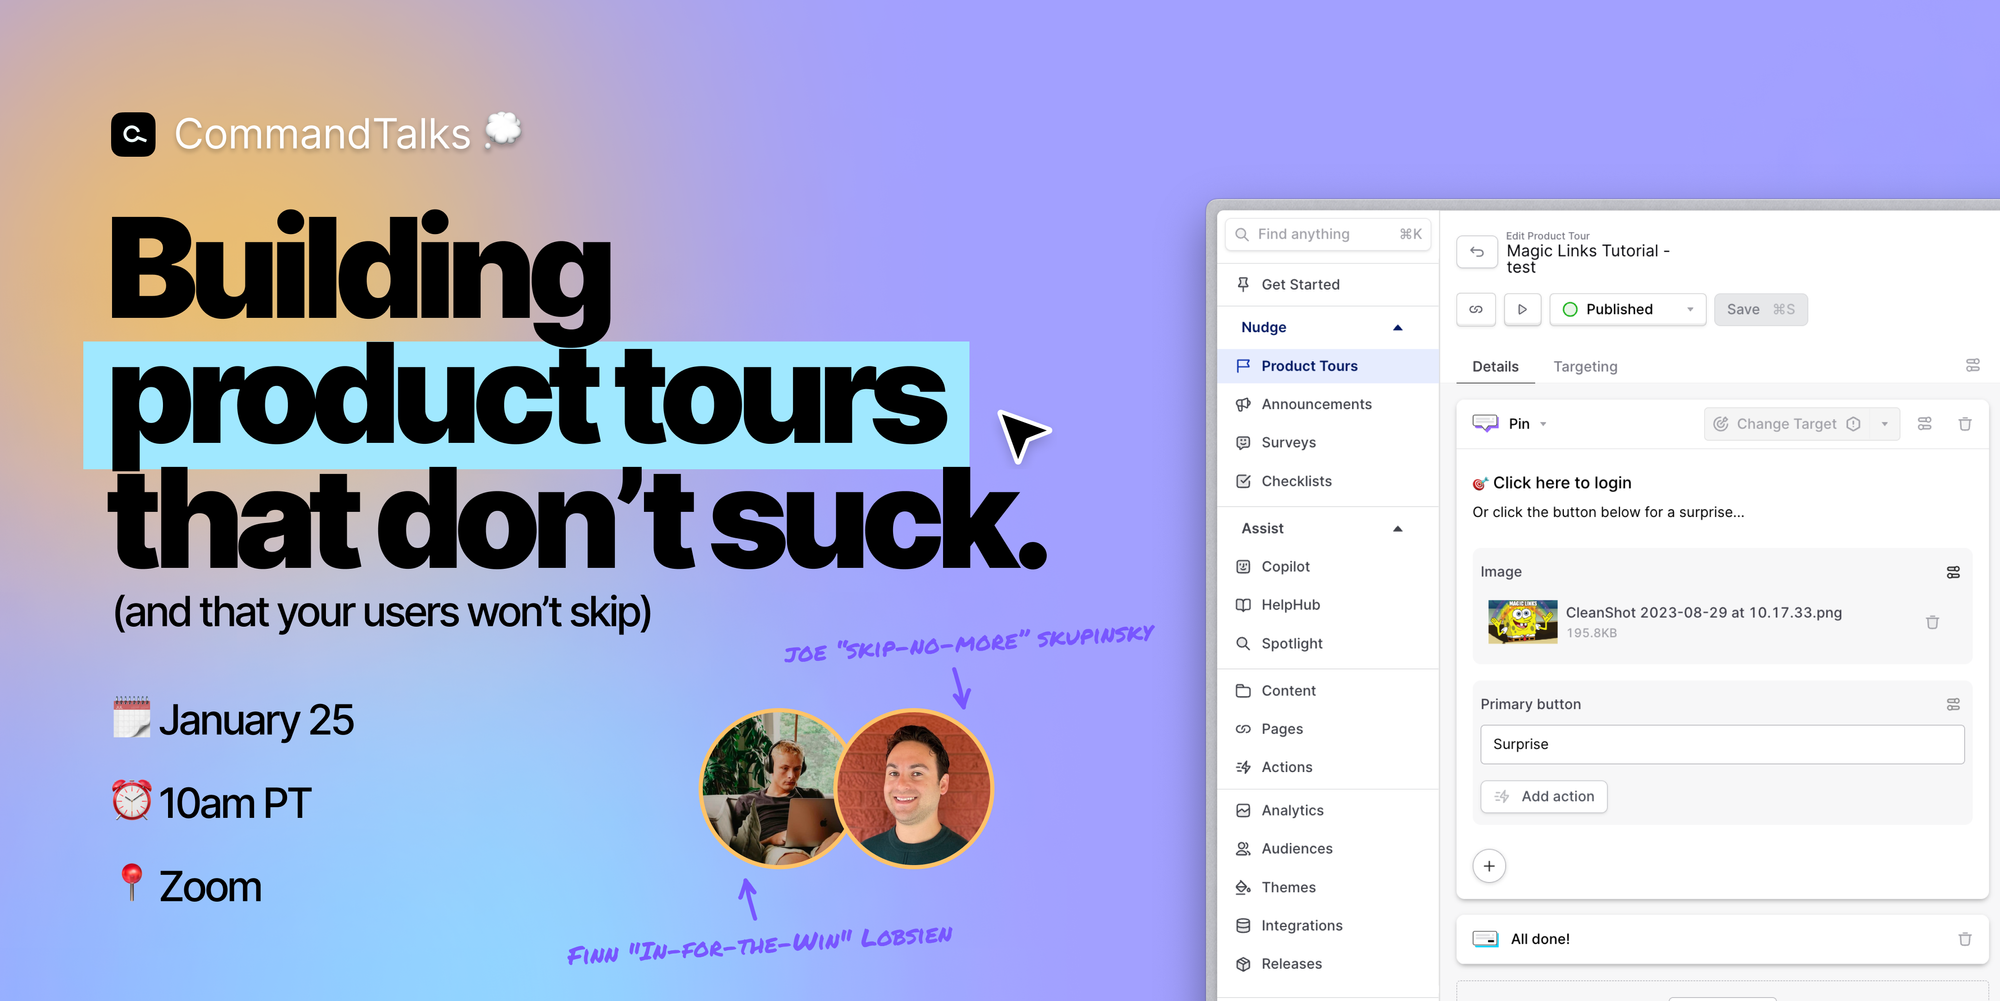 Info for "Building product tours that don't suck" workshop